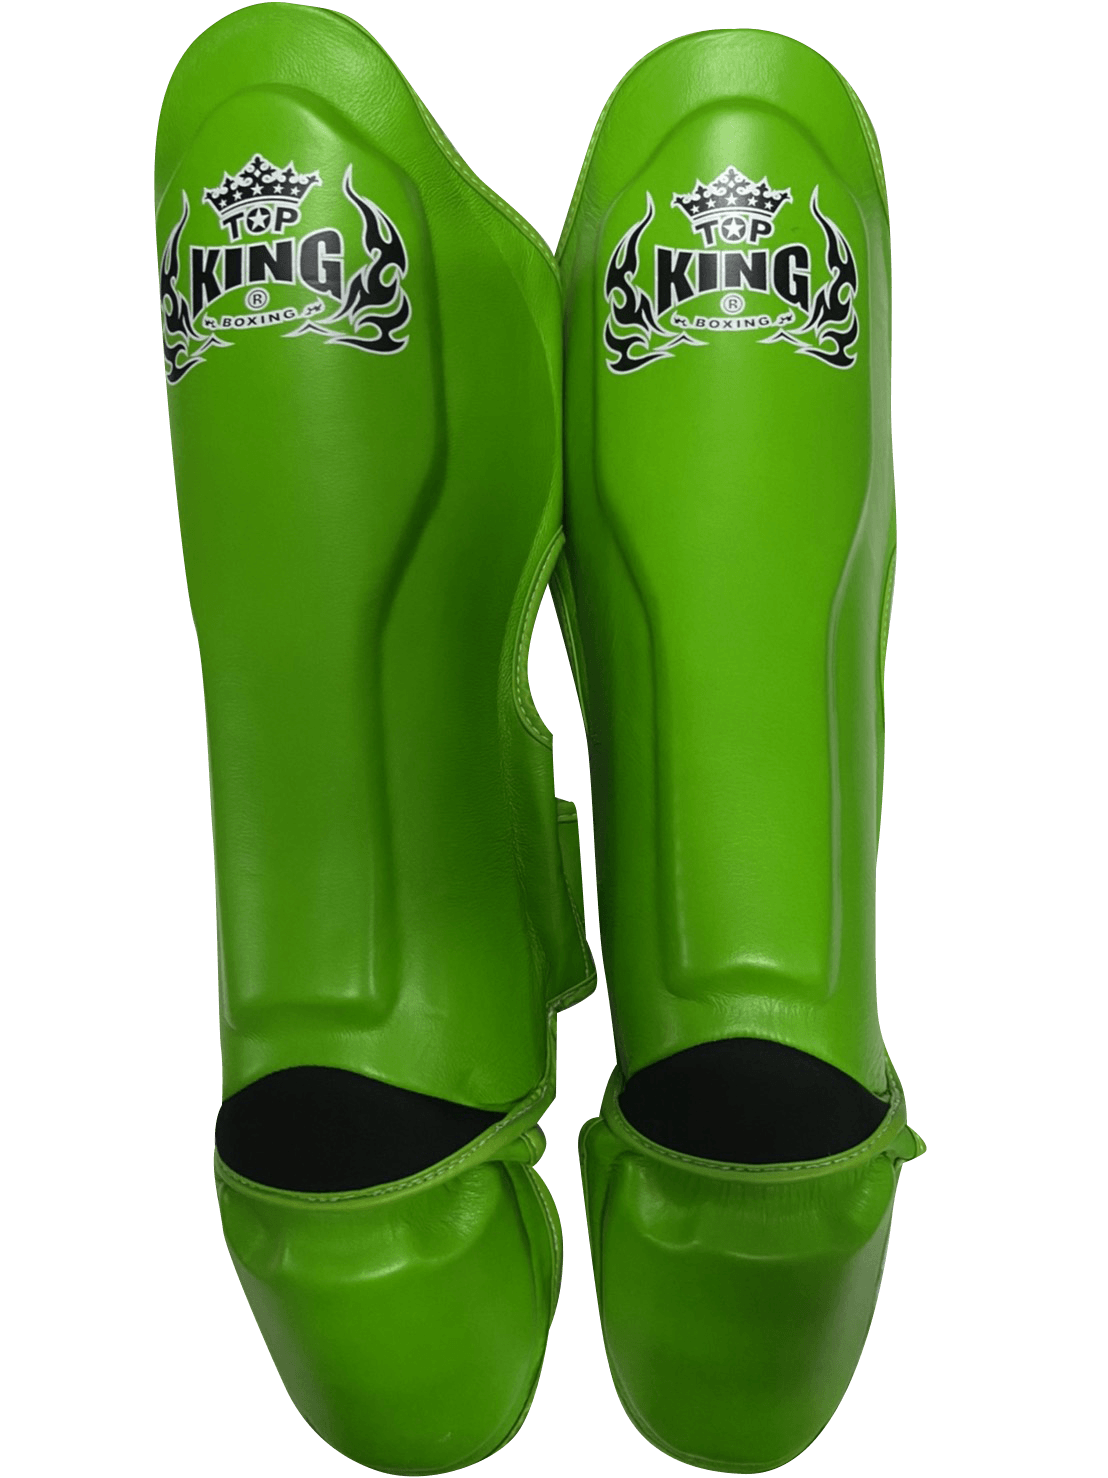 Top King Shinguards”Pro” Green Genuine Leather GL